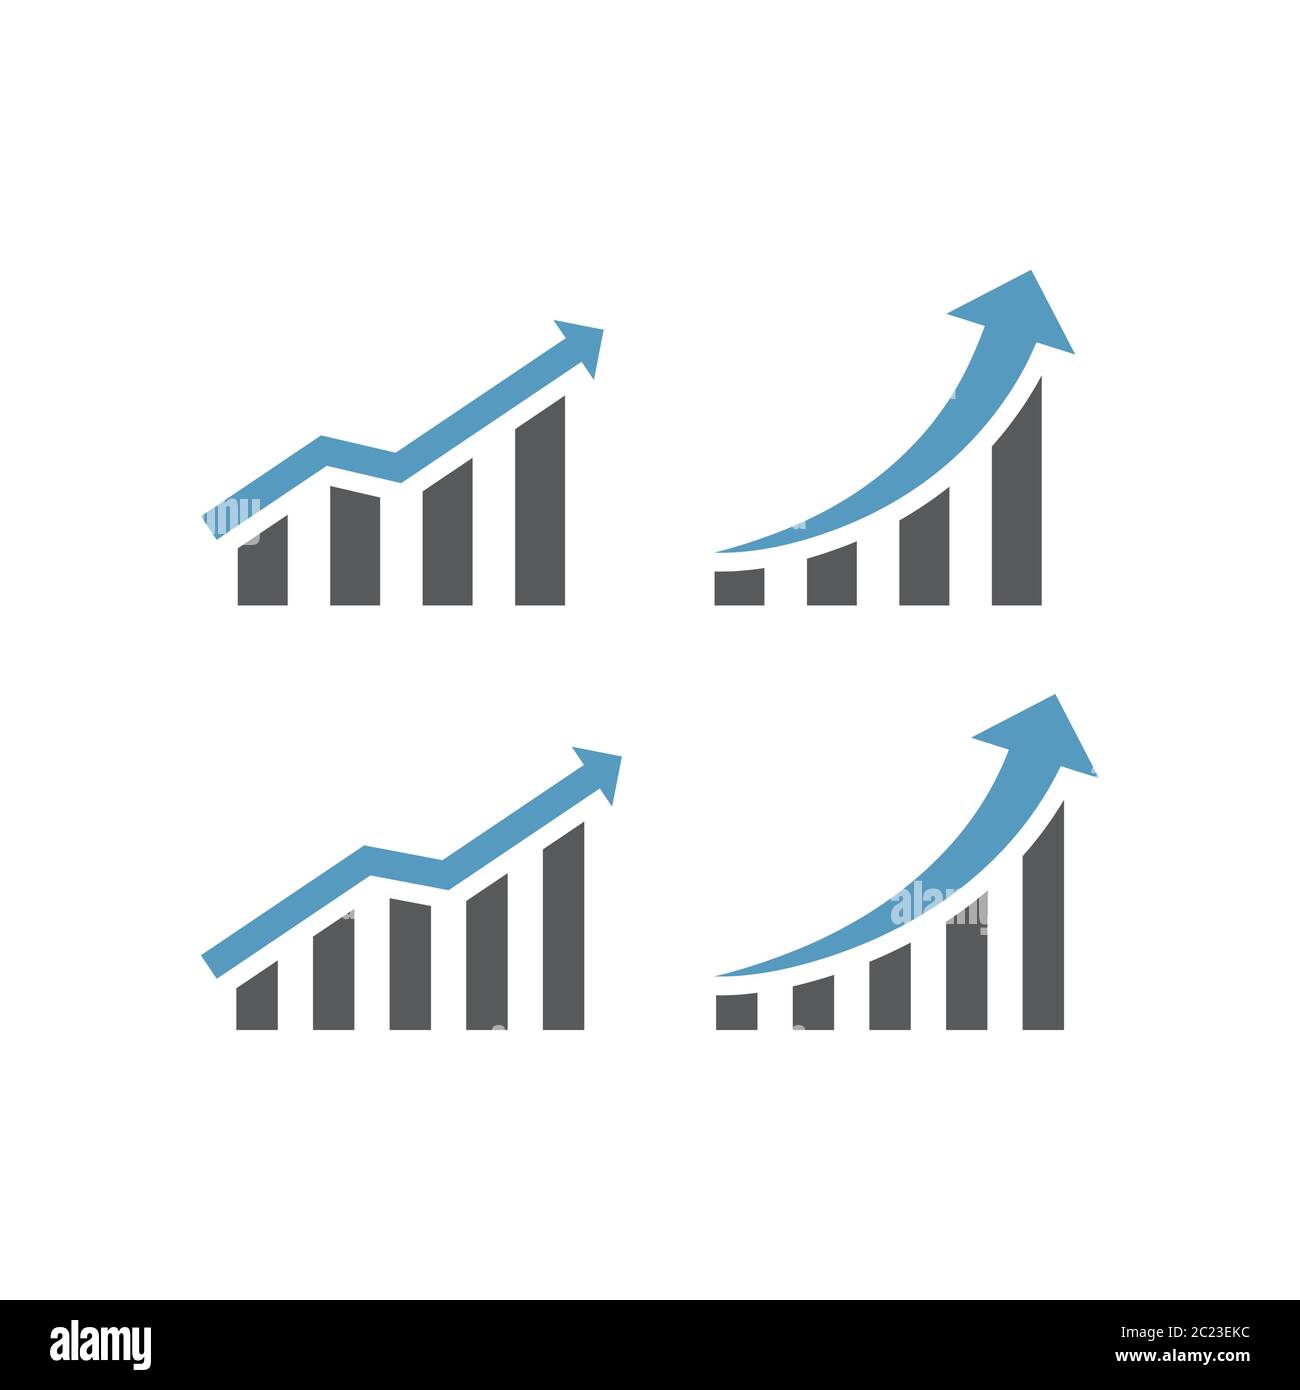 Growth bar infographic or chart with arrow icon. Data analysis graph, growing up business vector. Stock Vector